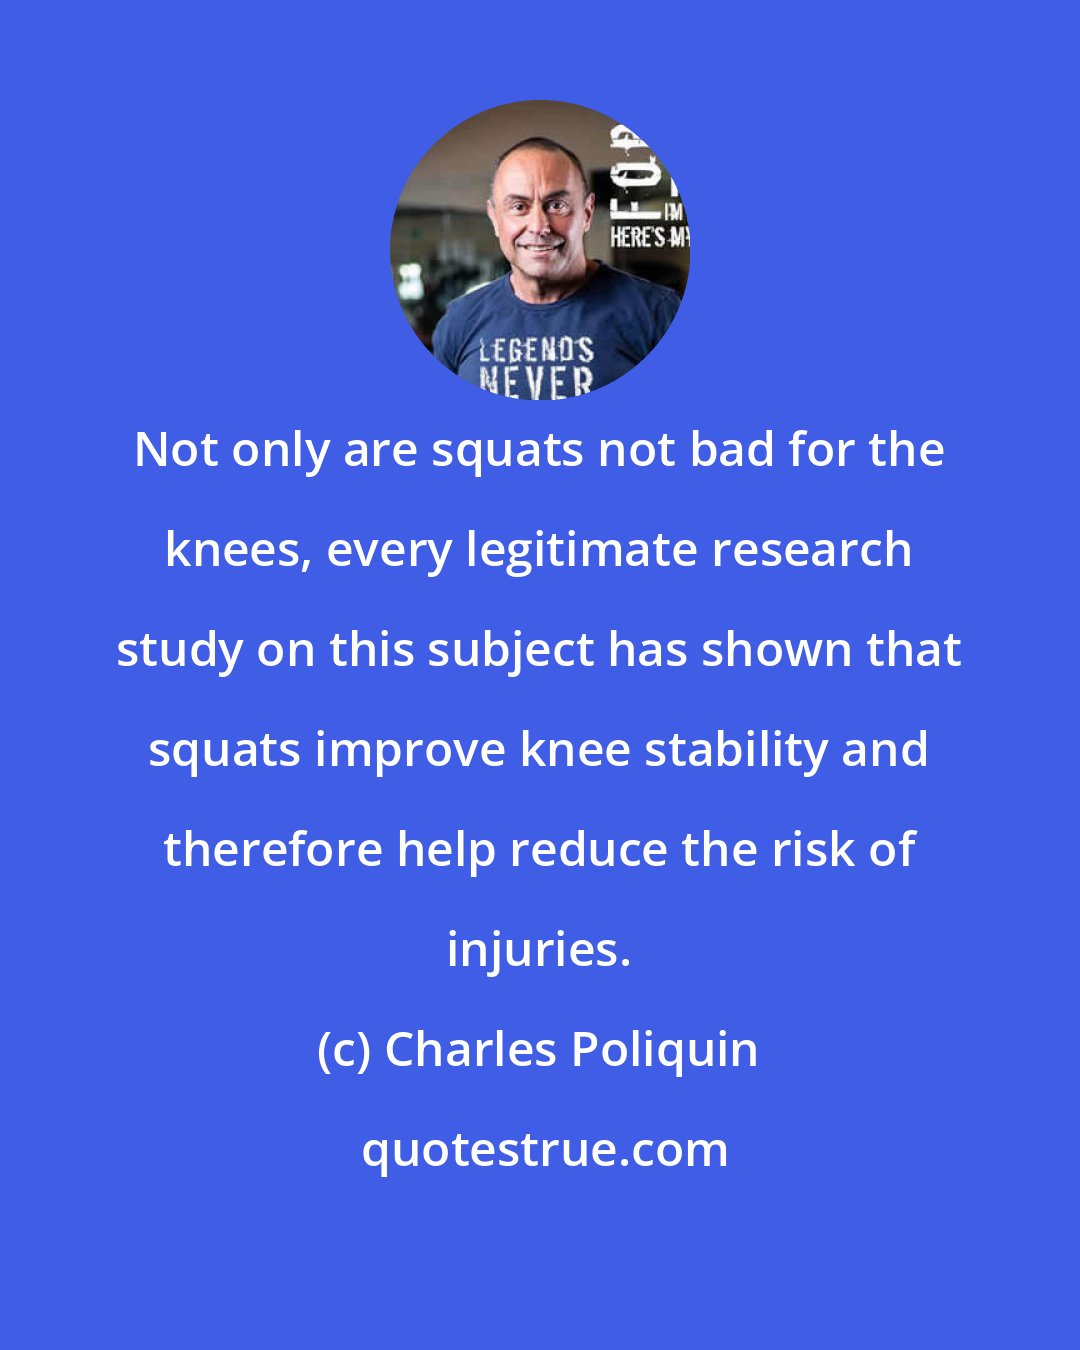 Charles Poliquin: Not only are squats not bad for the knees, every legitimate research study on this subject has shown that squats improve knee stability and therefore help reduce the risk of injuries.